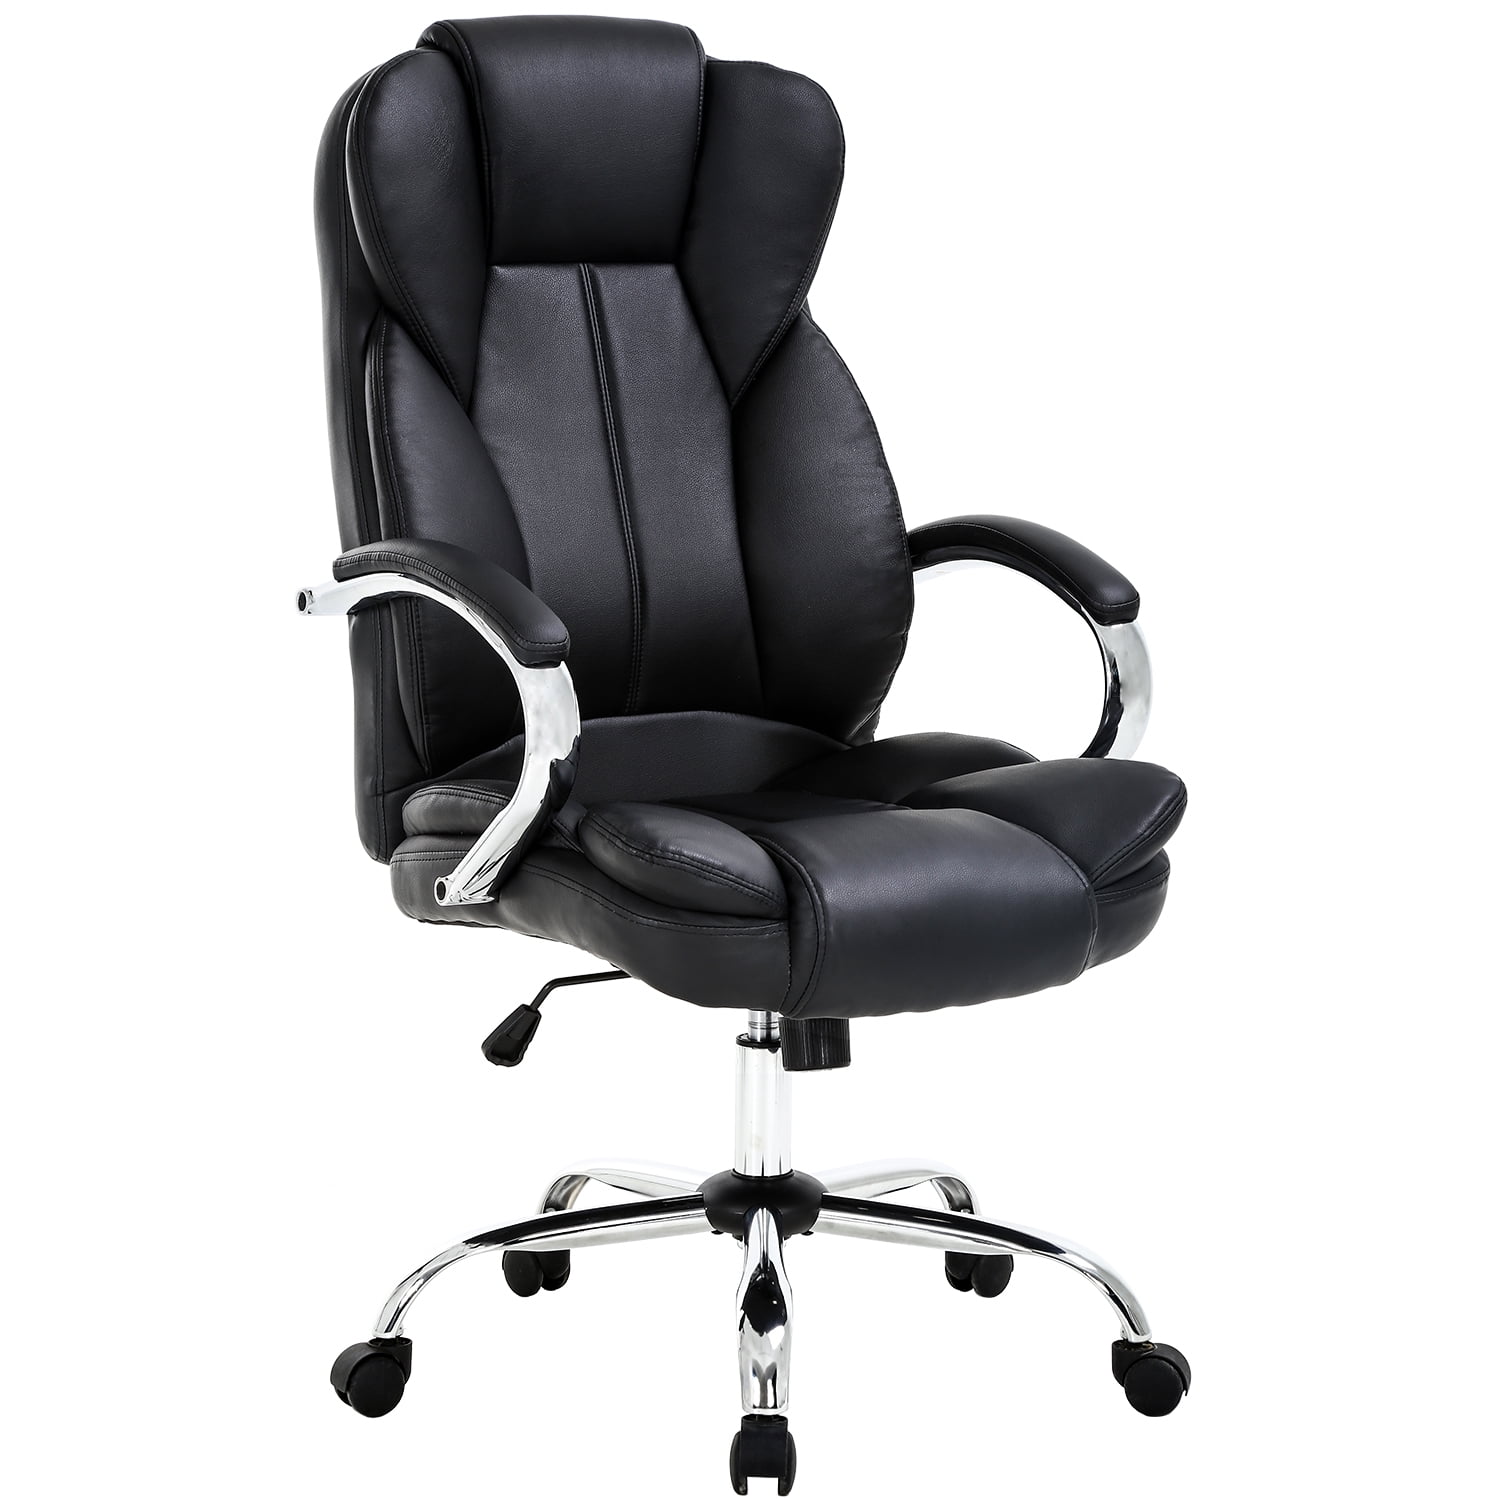 Best Budget Ergonomic Chair The Best Ergonomic Office Chairs (home Or Office, Including Kneeling